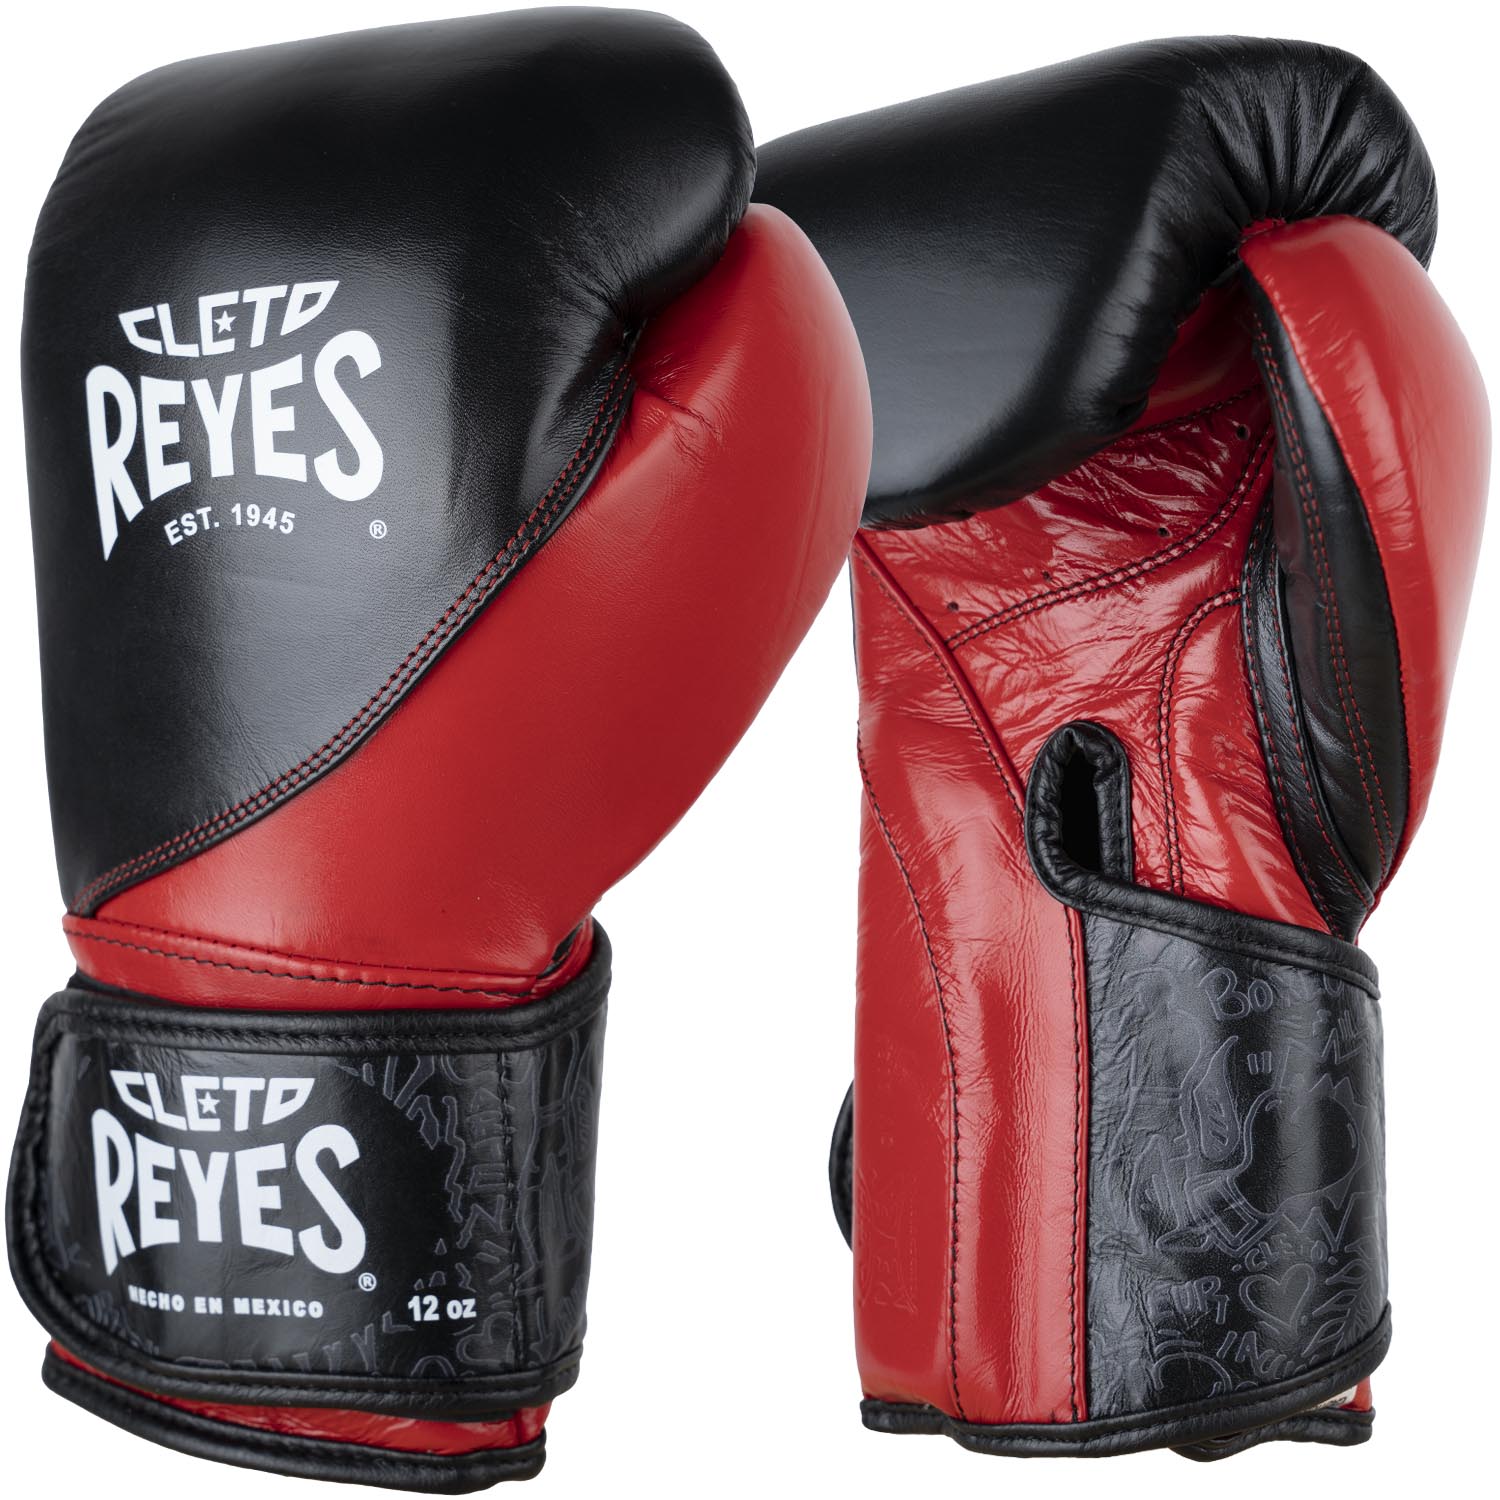 Cleto Reyes Boxing Gloves, High Precision Training, black-red